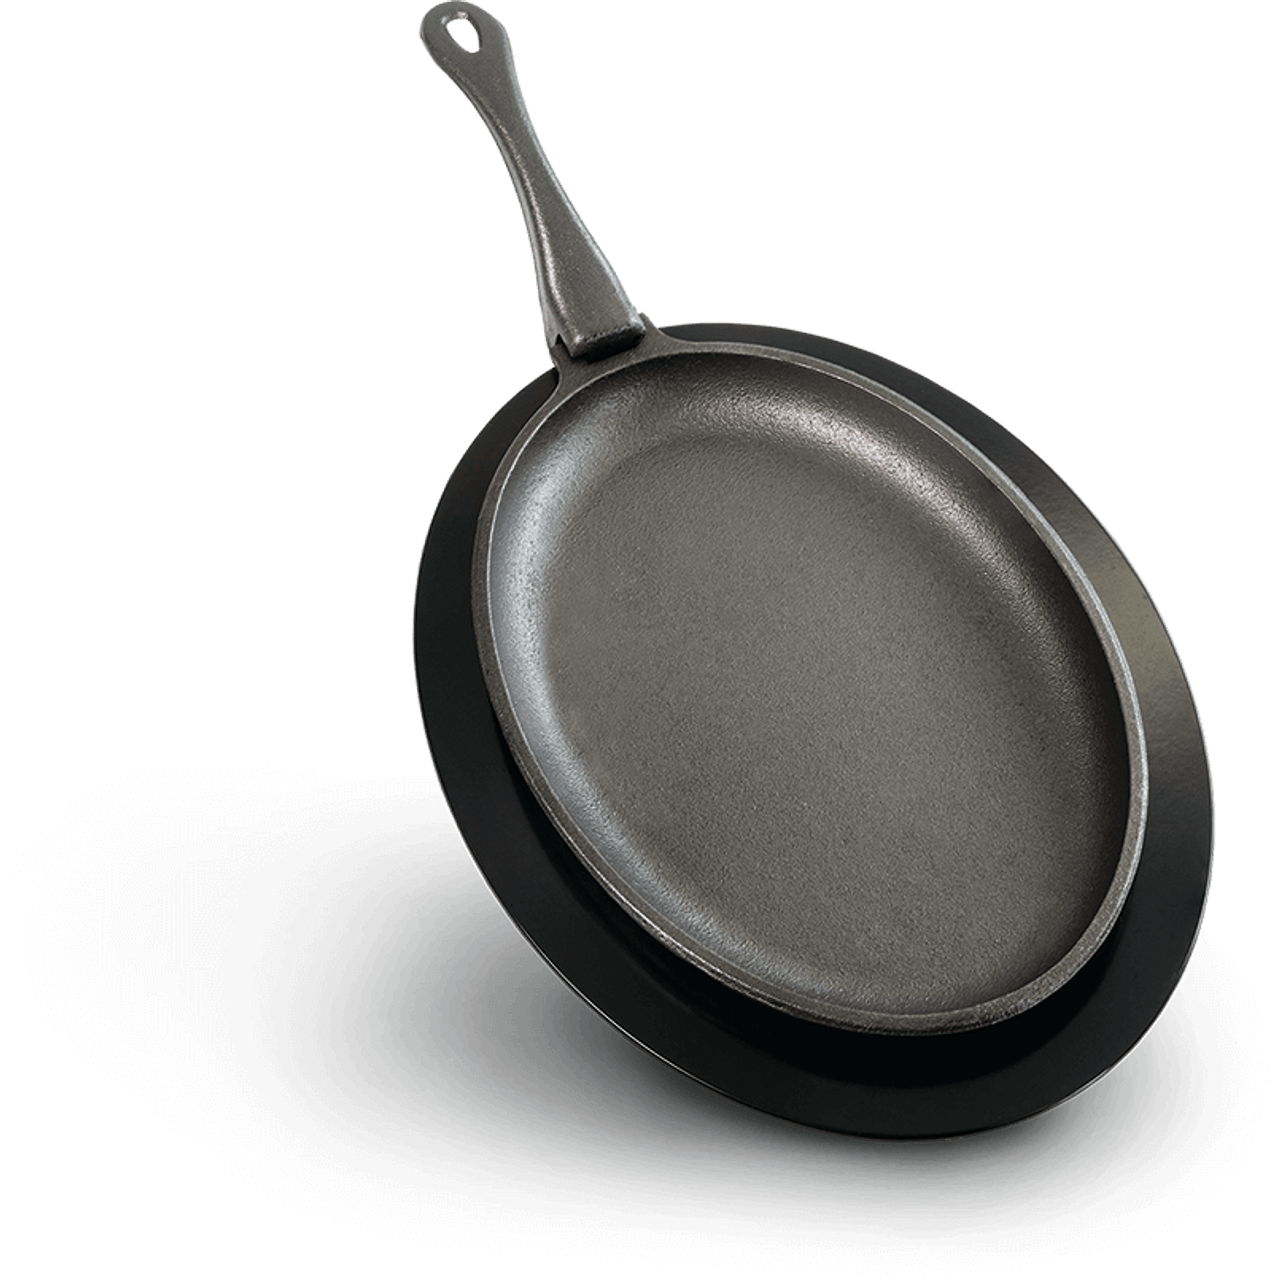 https://cdn11.bigcommerce.com/s-h4x3egp9by/images/stencil/1280x1280/products/12744/27630/56003-PROfessionalCastIronSkillet-onWhite-Angle-800px_1__64491.1594153156.png?c=2